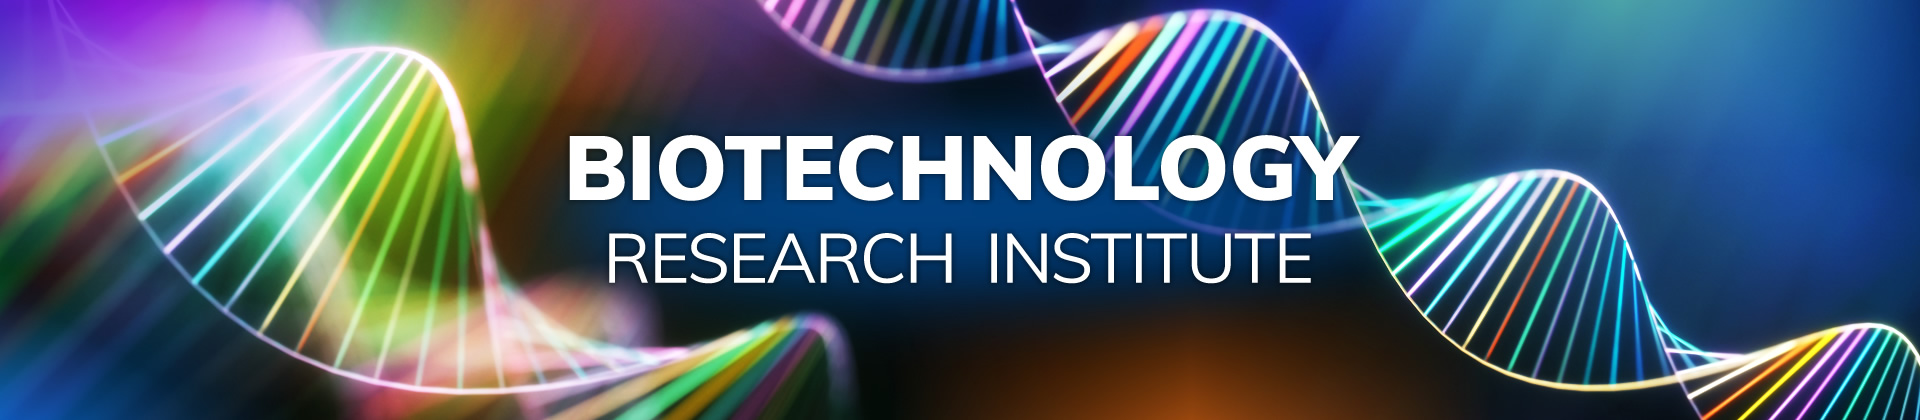 Biotechnology Research Institute